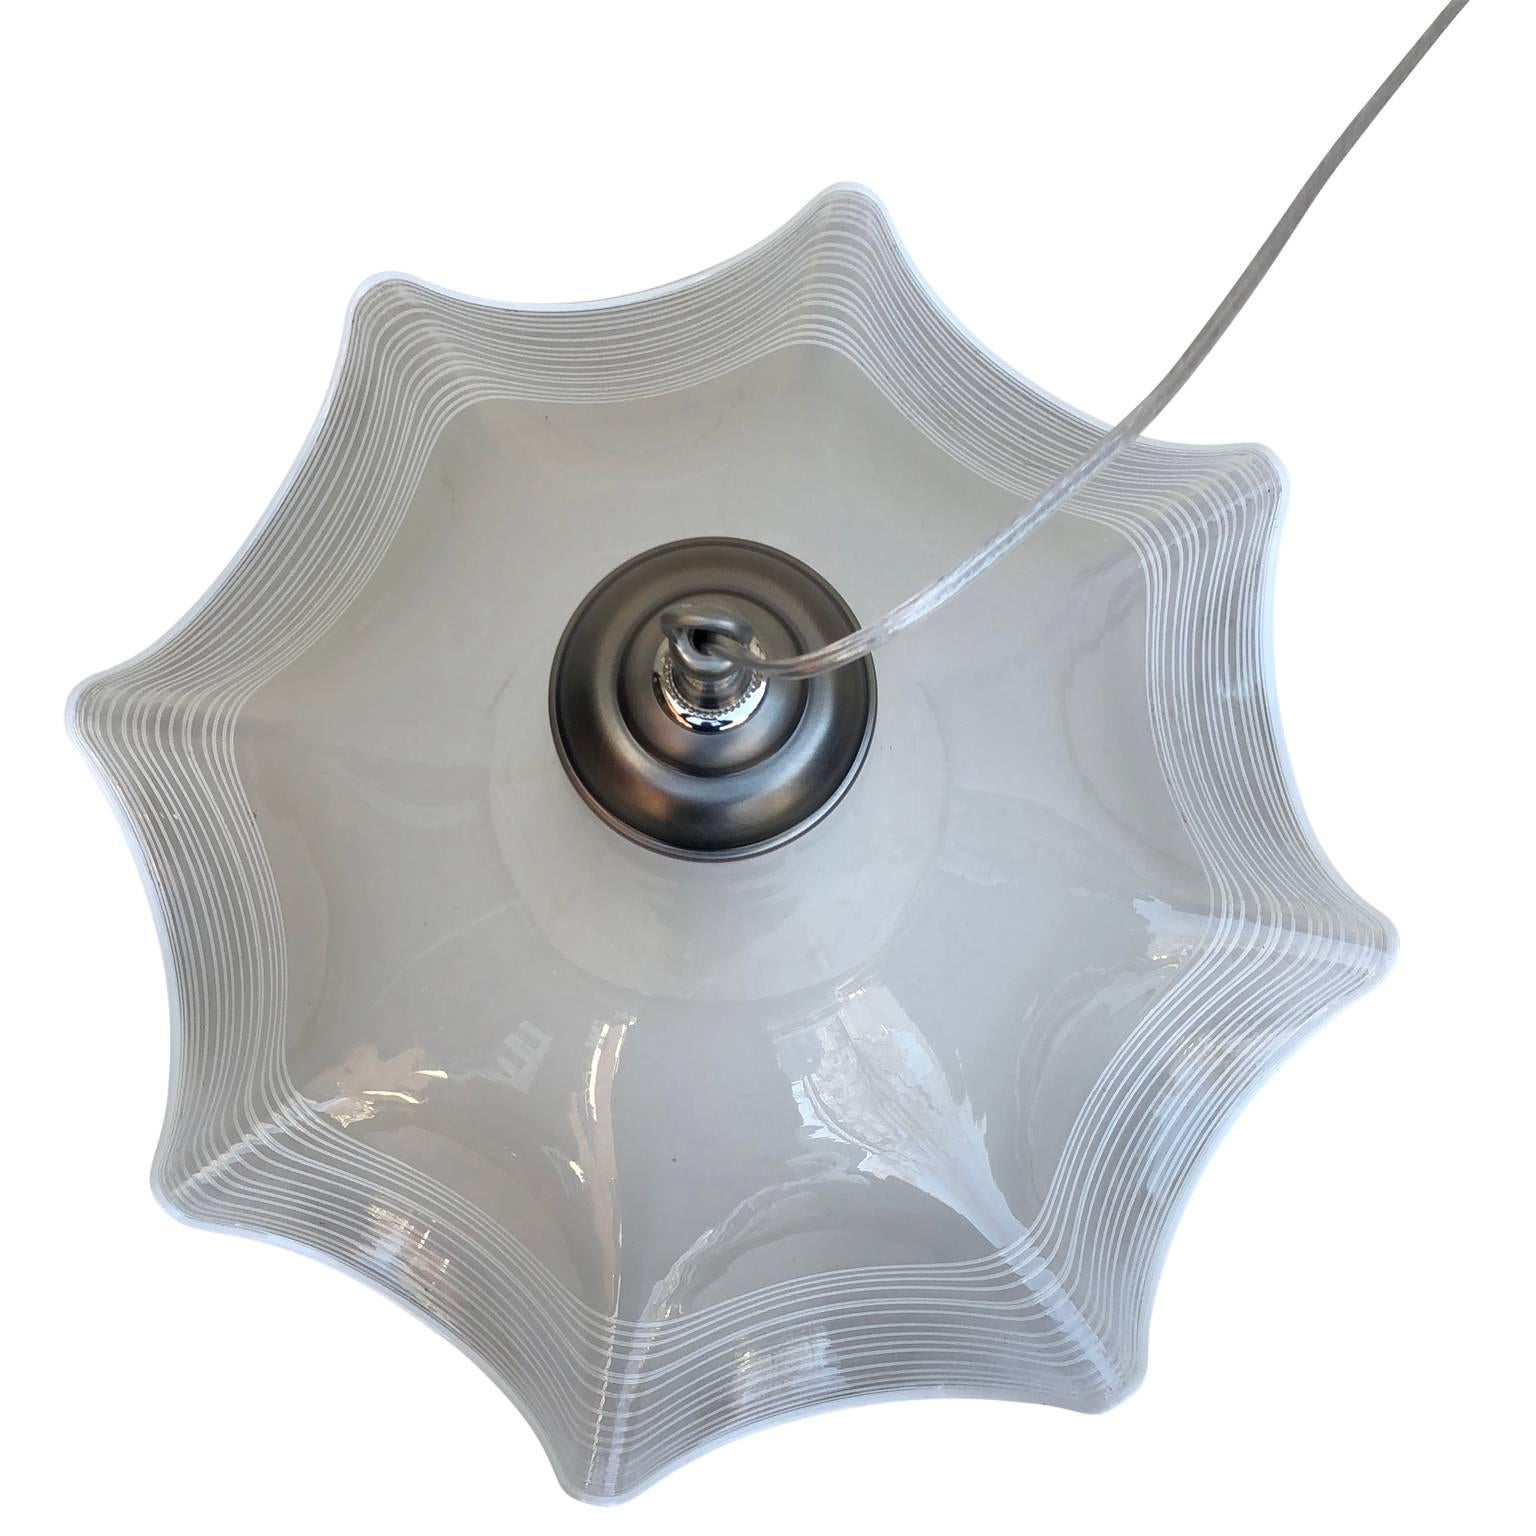 Large Murano Opaline Glass Pendant Light Fixture. Beautiful Opaline glass fixture. This lovely and elegant fixture will be a beautiful addition to any room in your home. Graceful and elegant, it will grace a foyer as well as a bedroom. Vintage